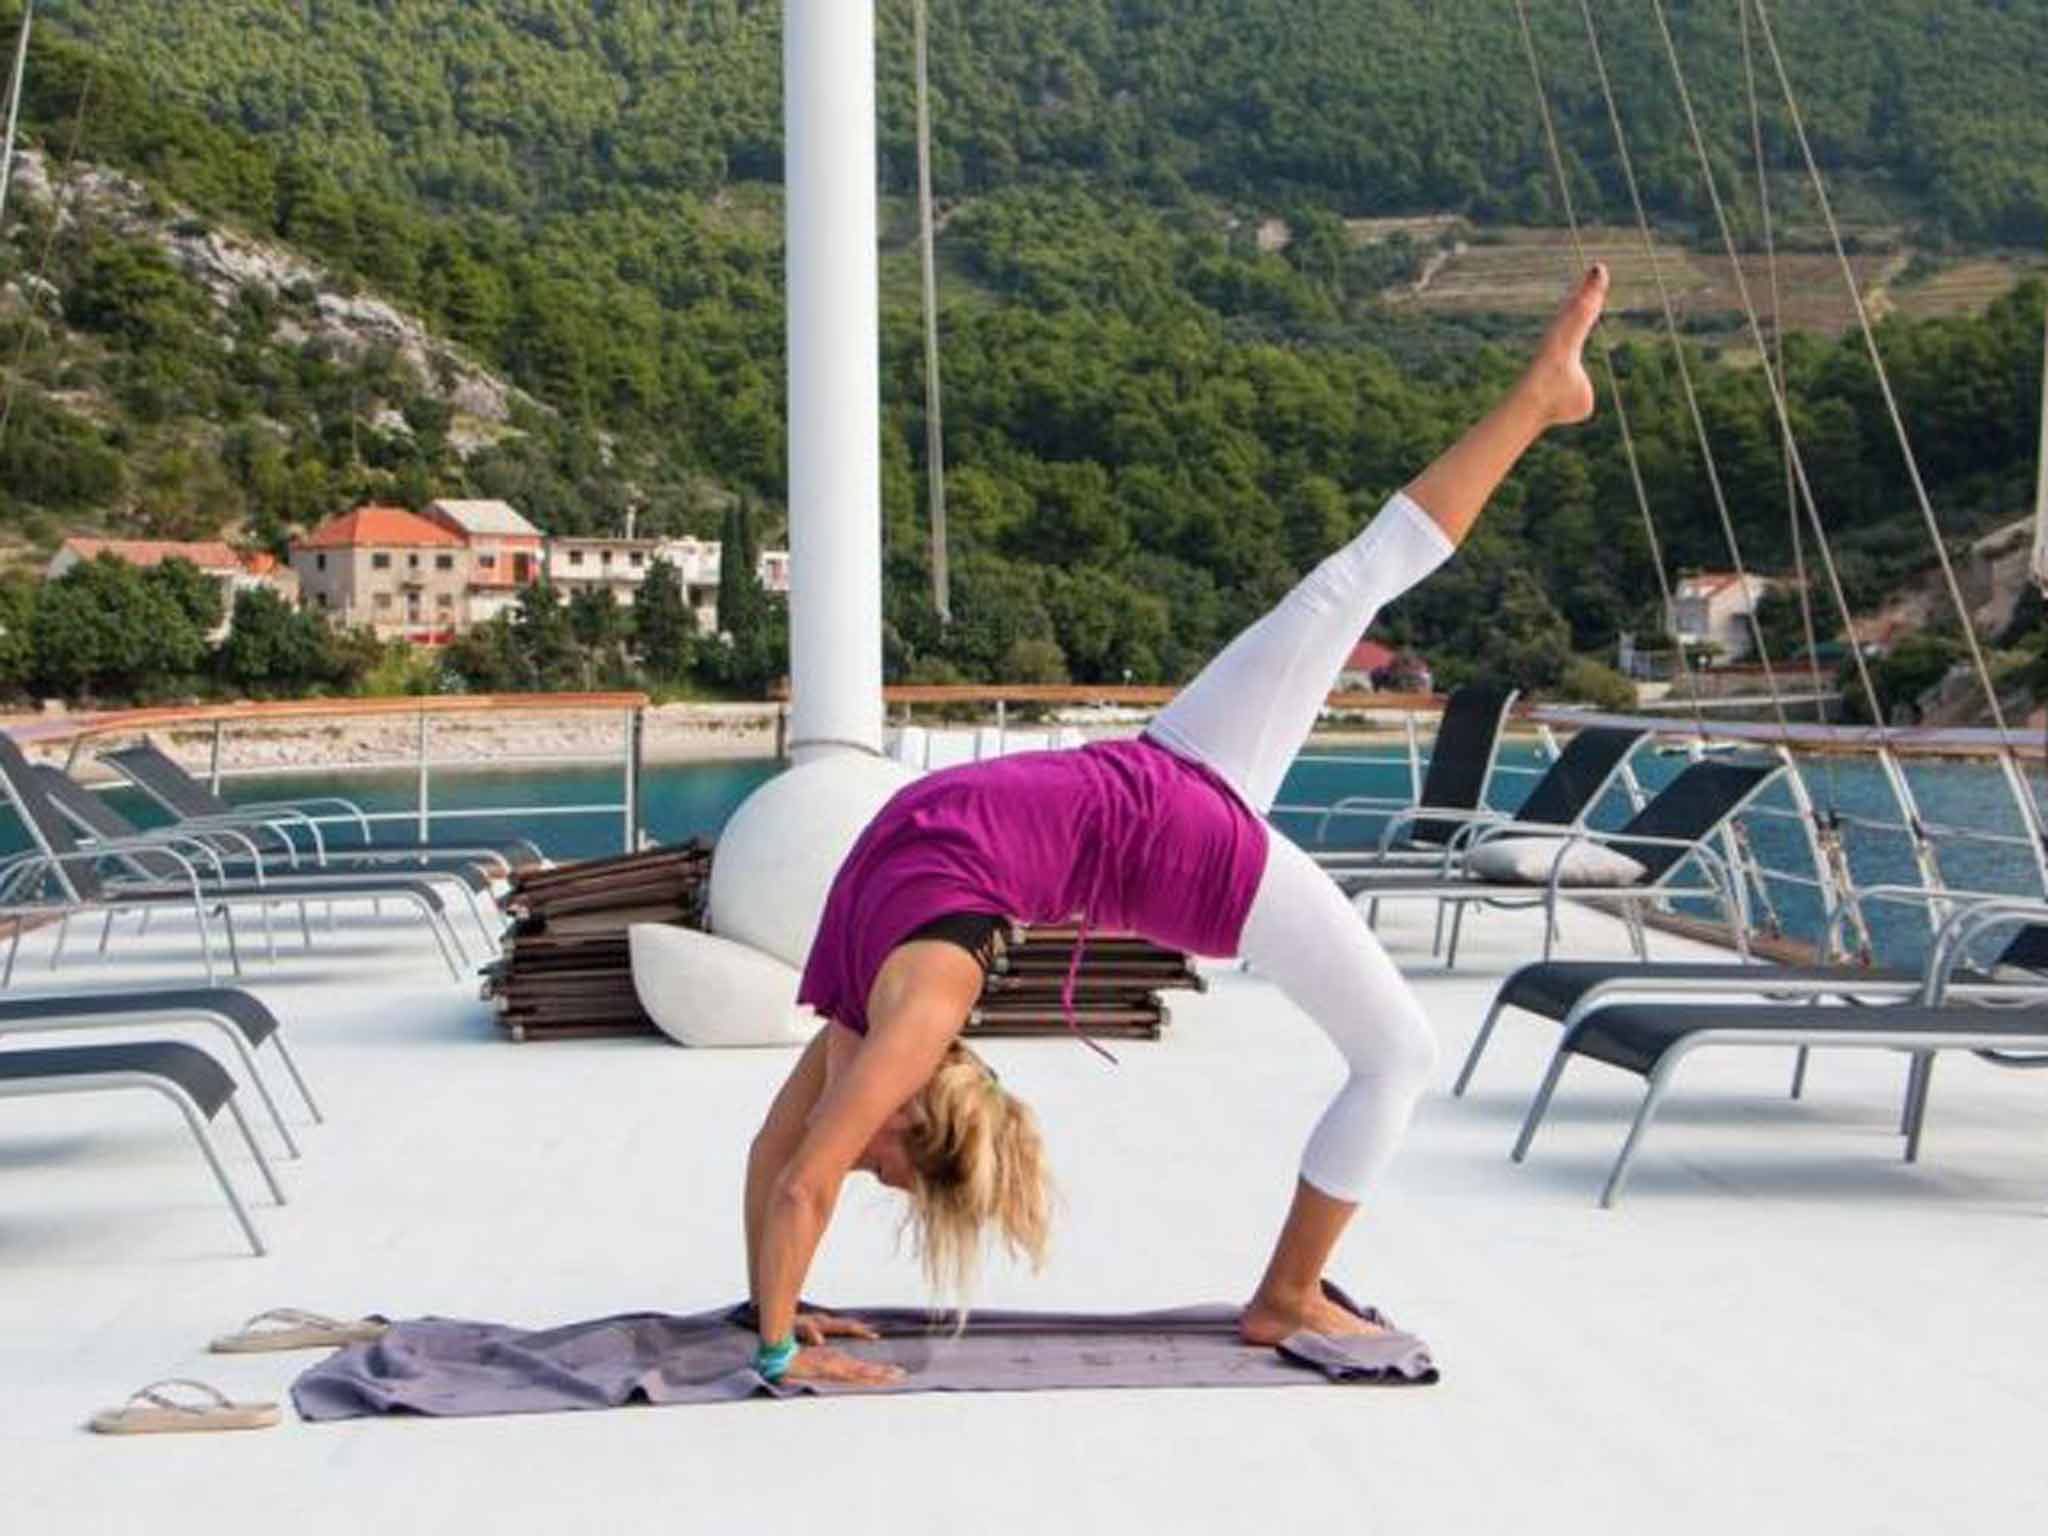 &#13;
The 15-cabin MV Adriatic Queen: Morning hatha-style yoga sessions&#13;